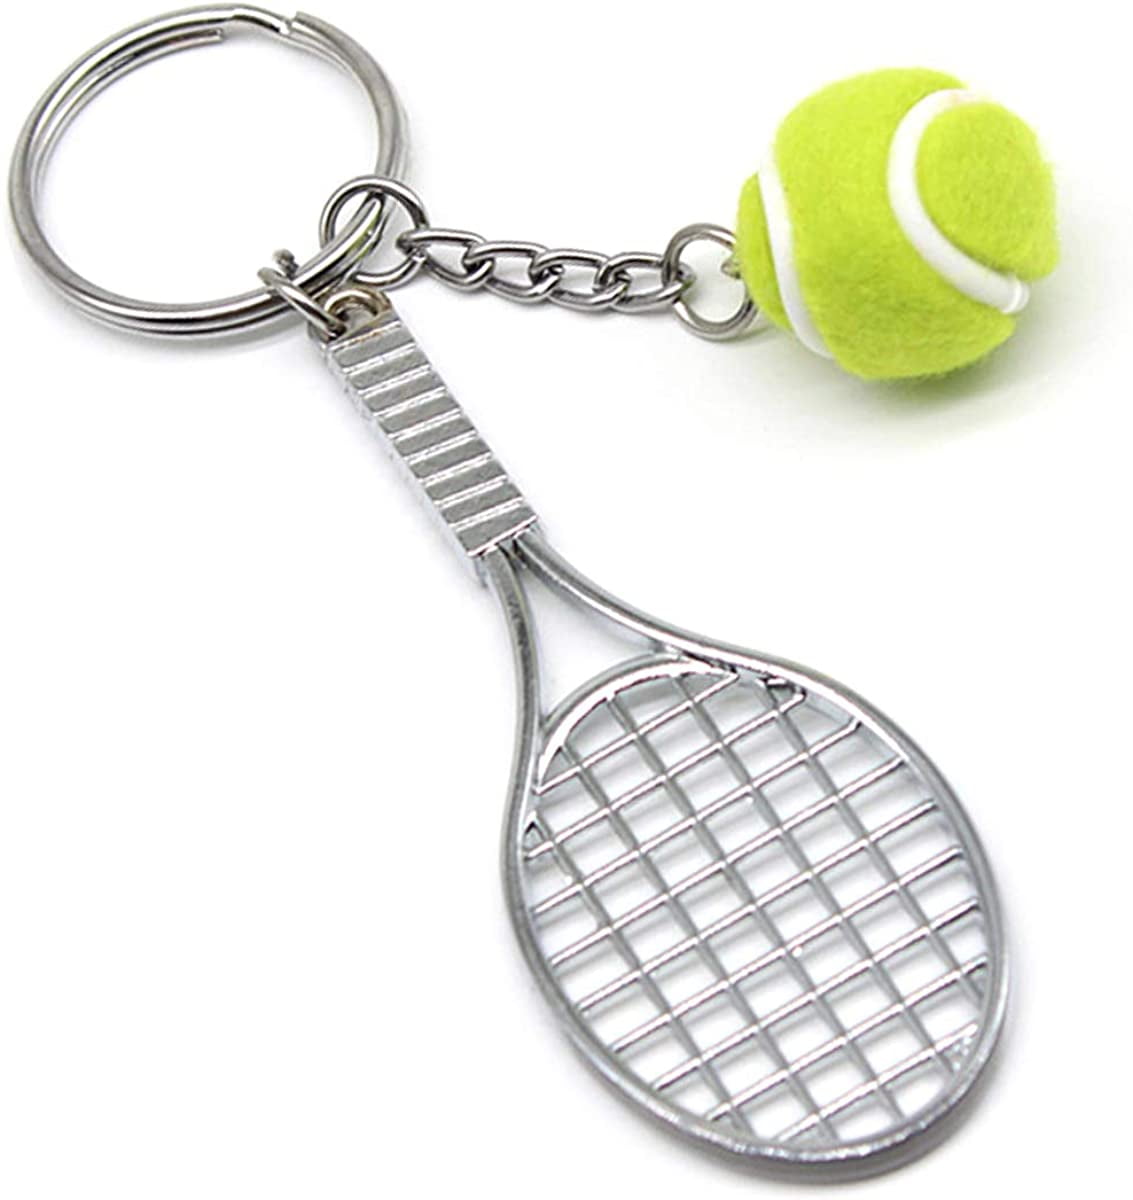 POOL BALL 8 Ball Sport Quality Chrome Keyring Picture Both Sides 